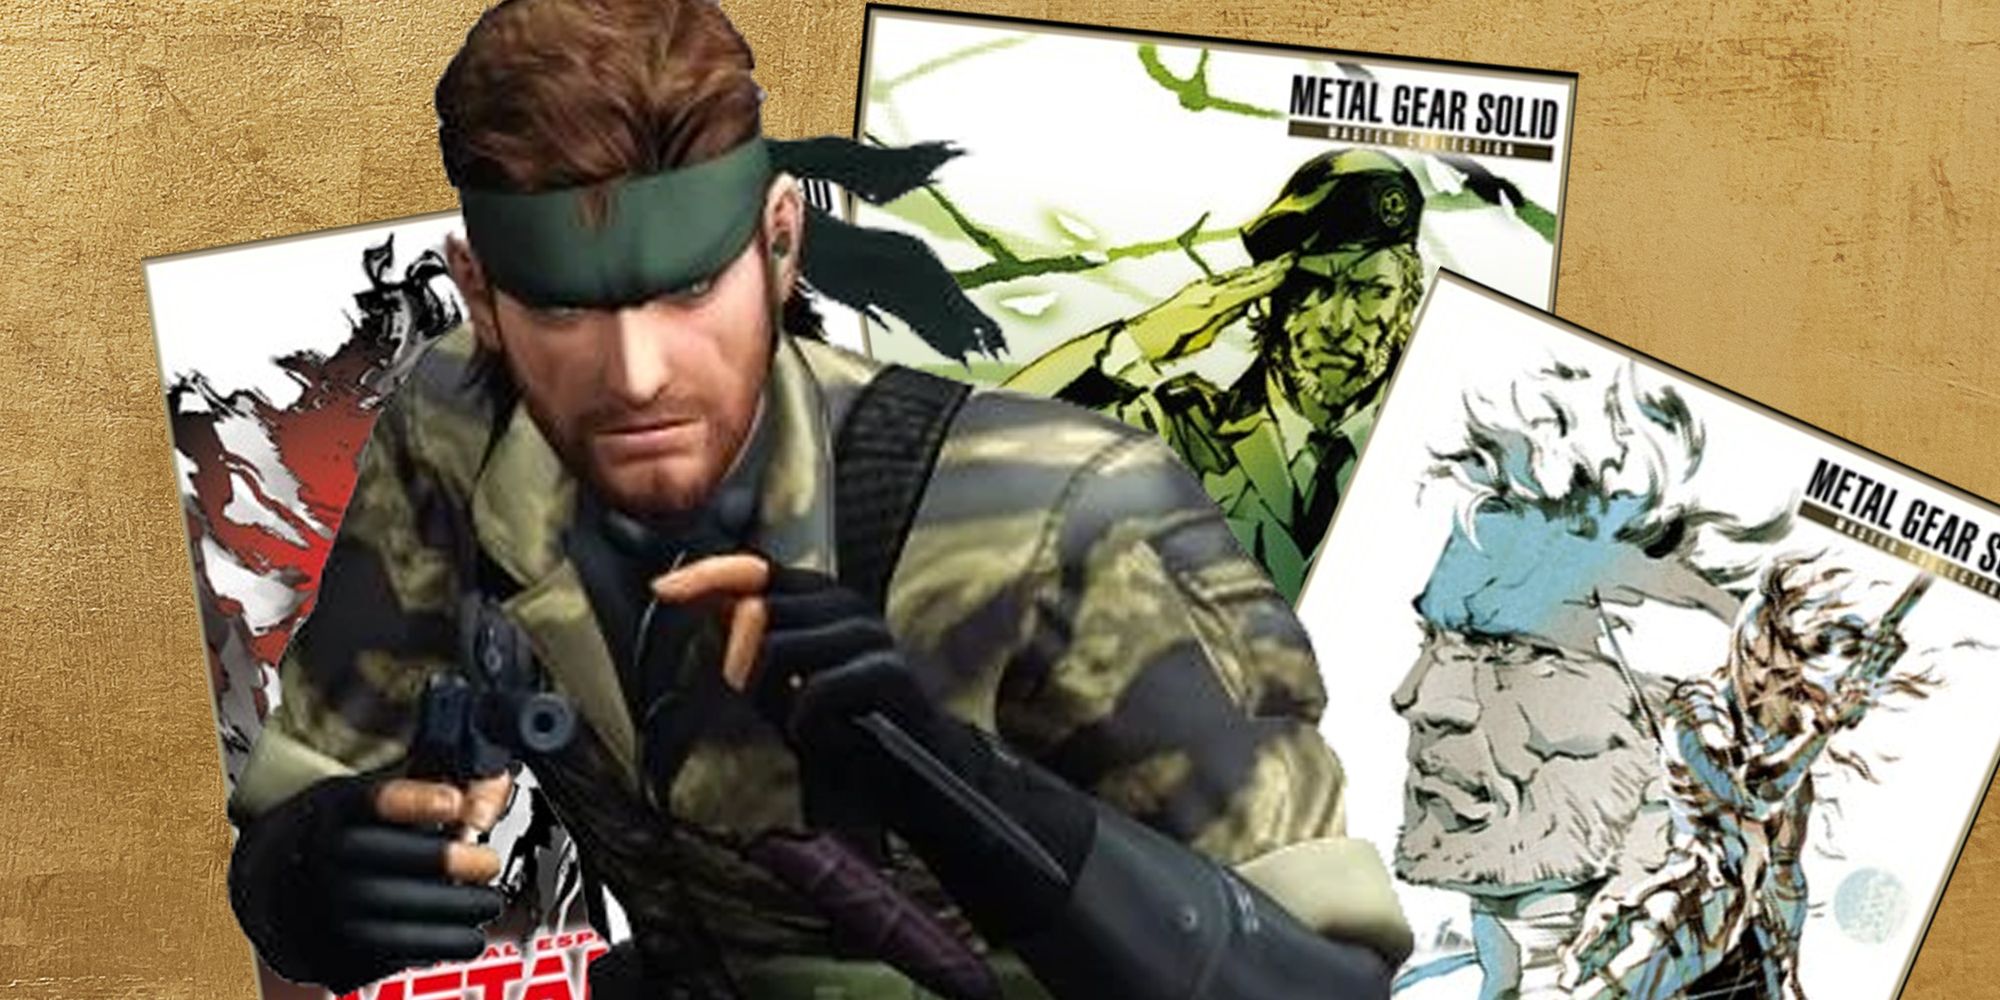 Metal Gear Solid Master Collection Preorder Now Available